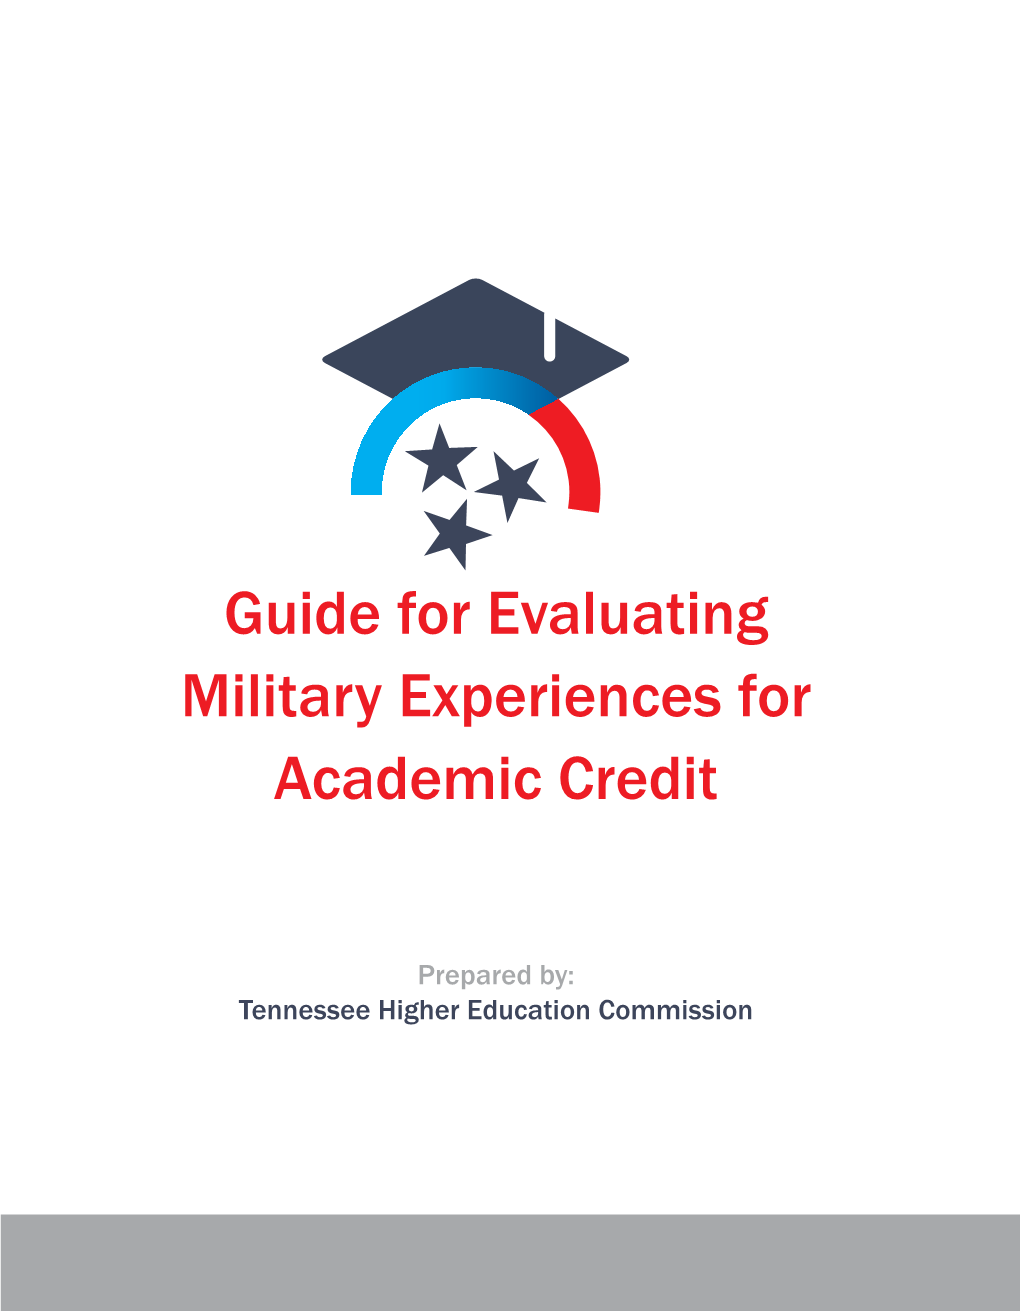 THEC Guide for Evaluating Military Experiences for Academic Credit